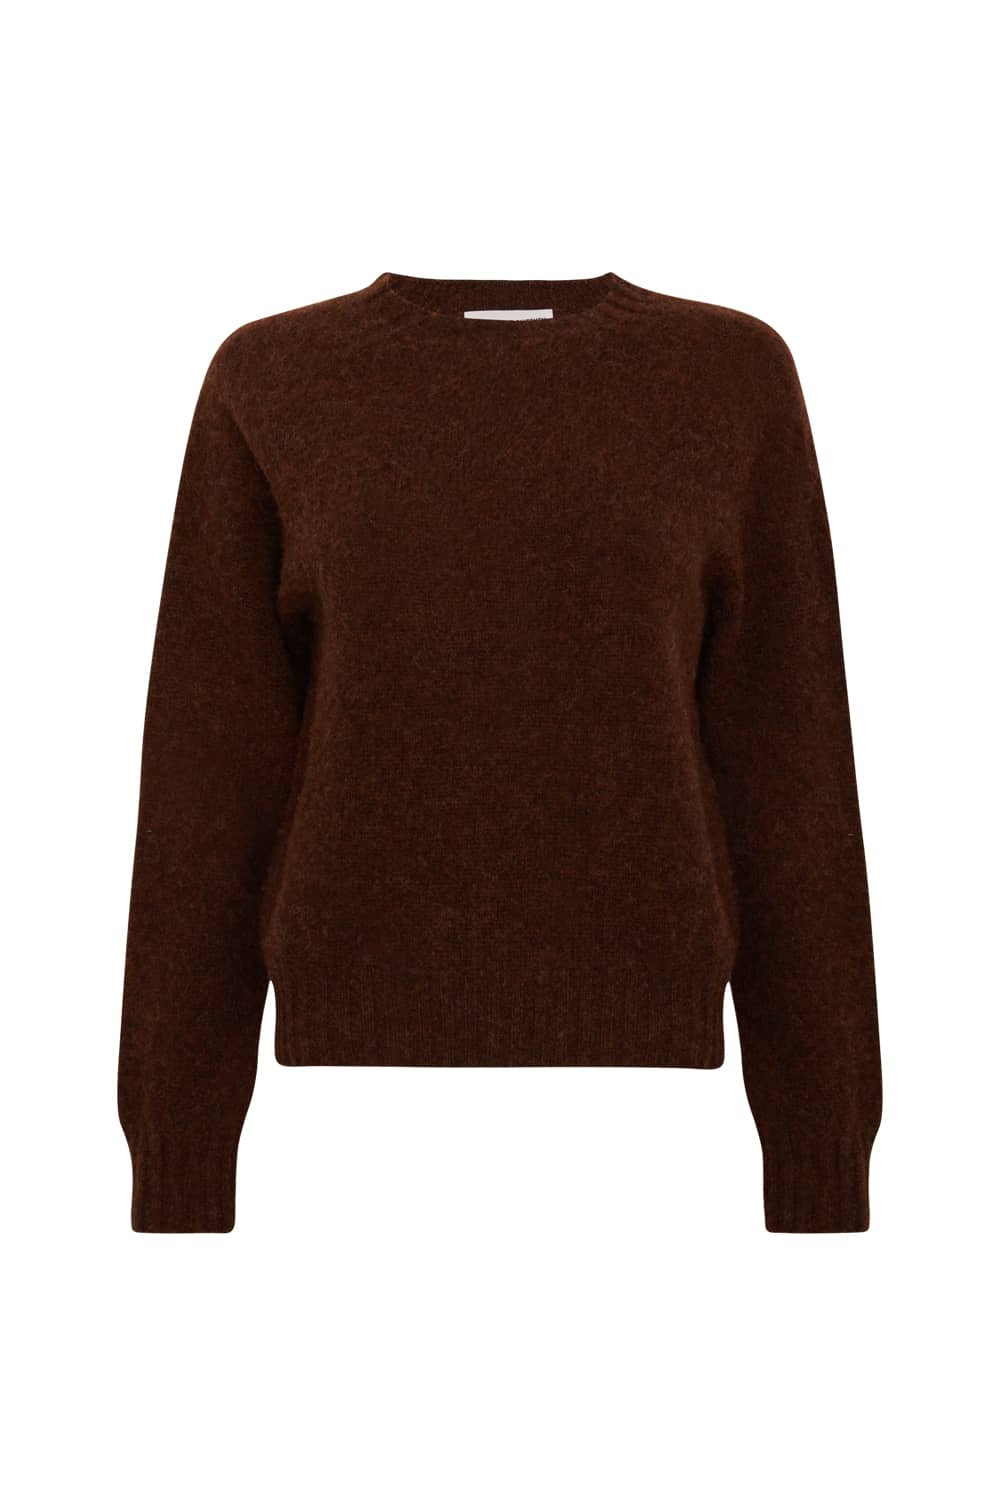 Women's Luxury Brushed Wool Cropped Jumper | Coffeee Brown | British Made